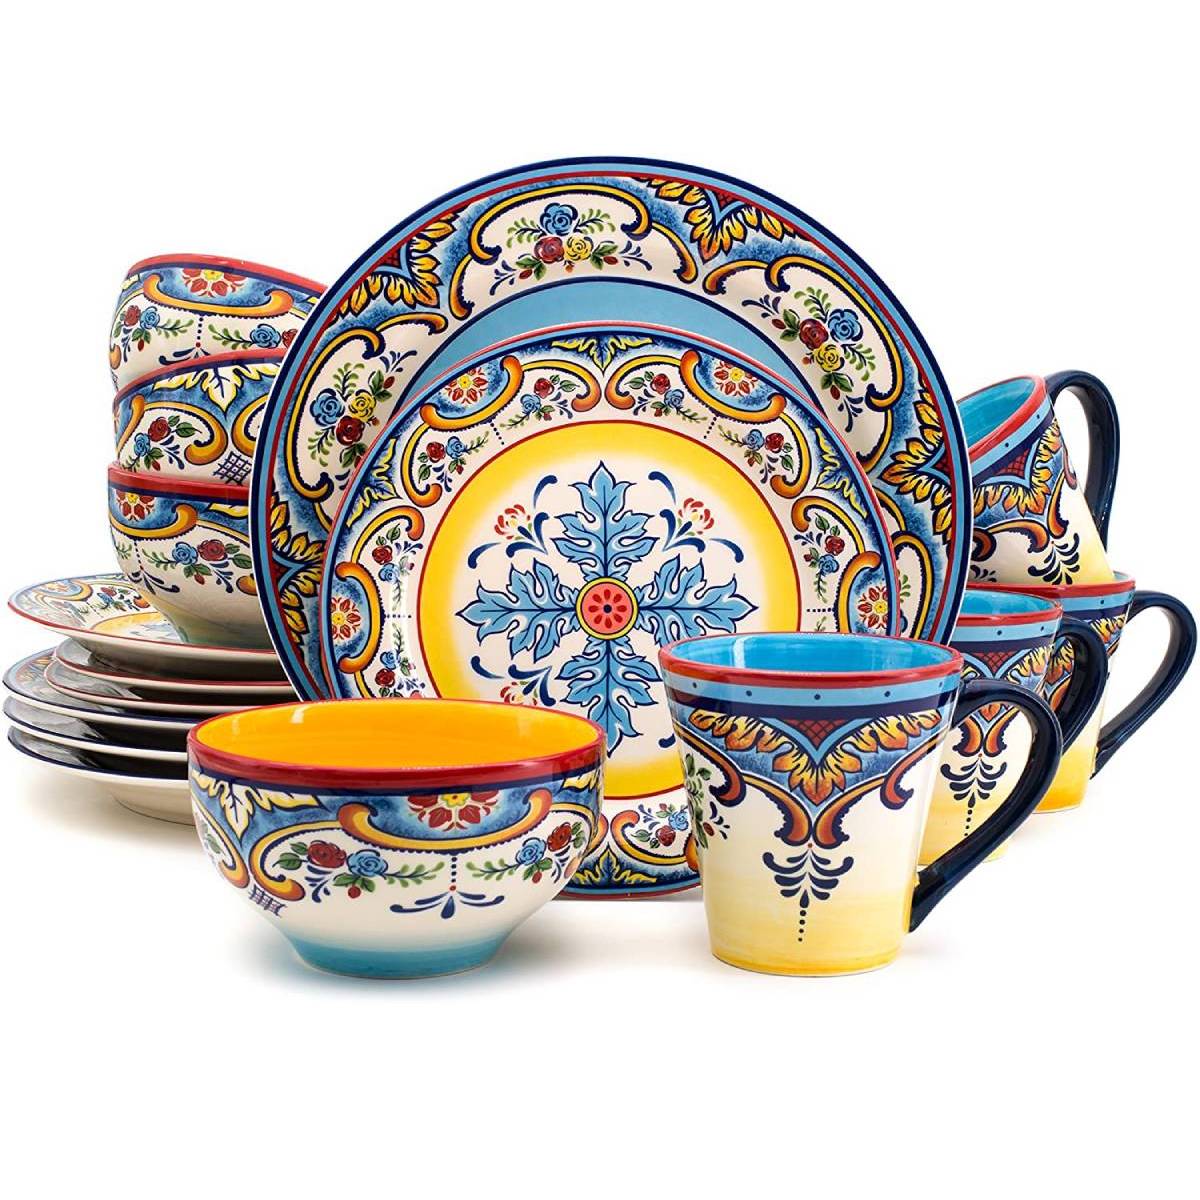 8 Dinnerware Sets That’ll Make Your Home-Cooked Meals Feel Fancy